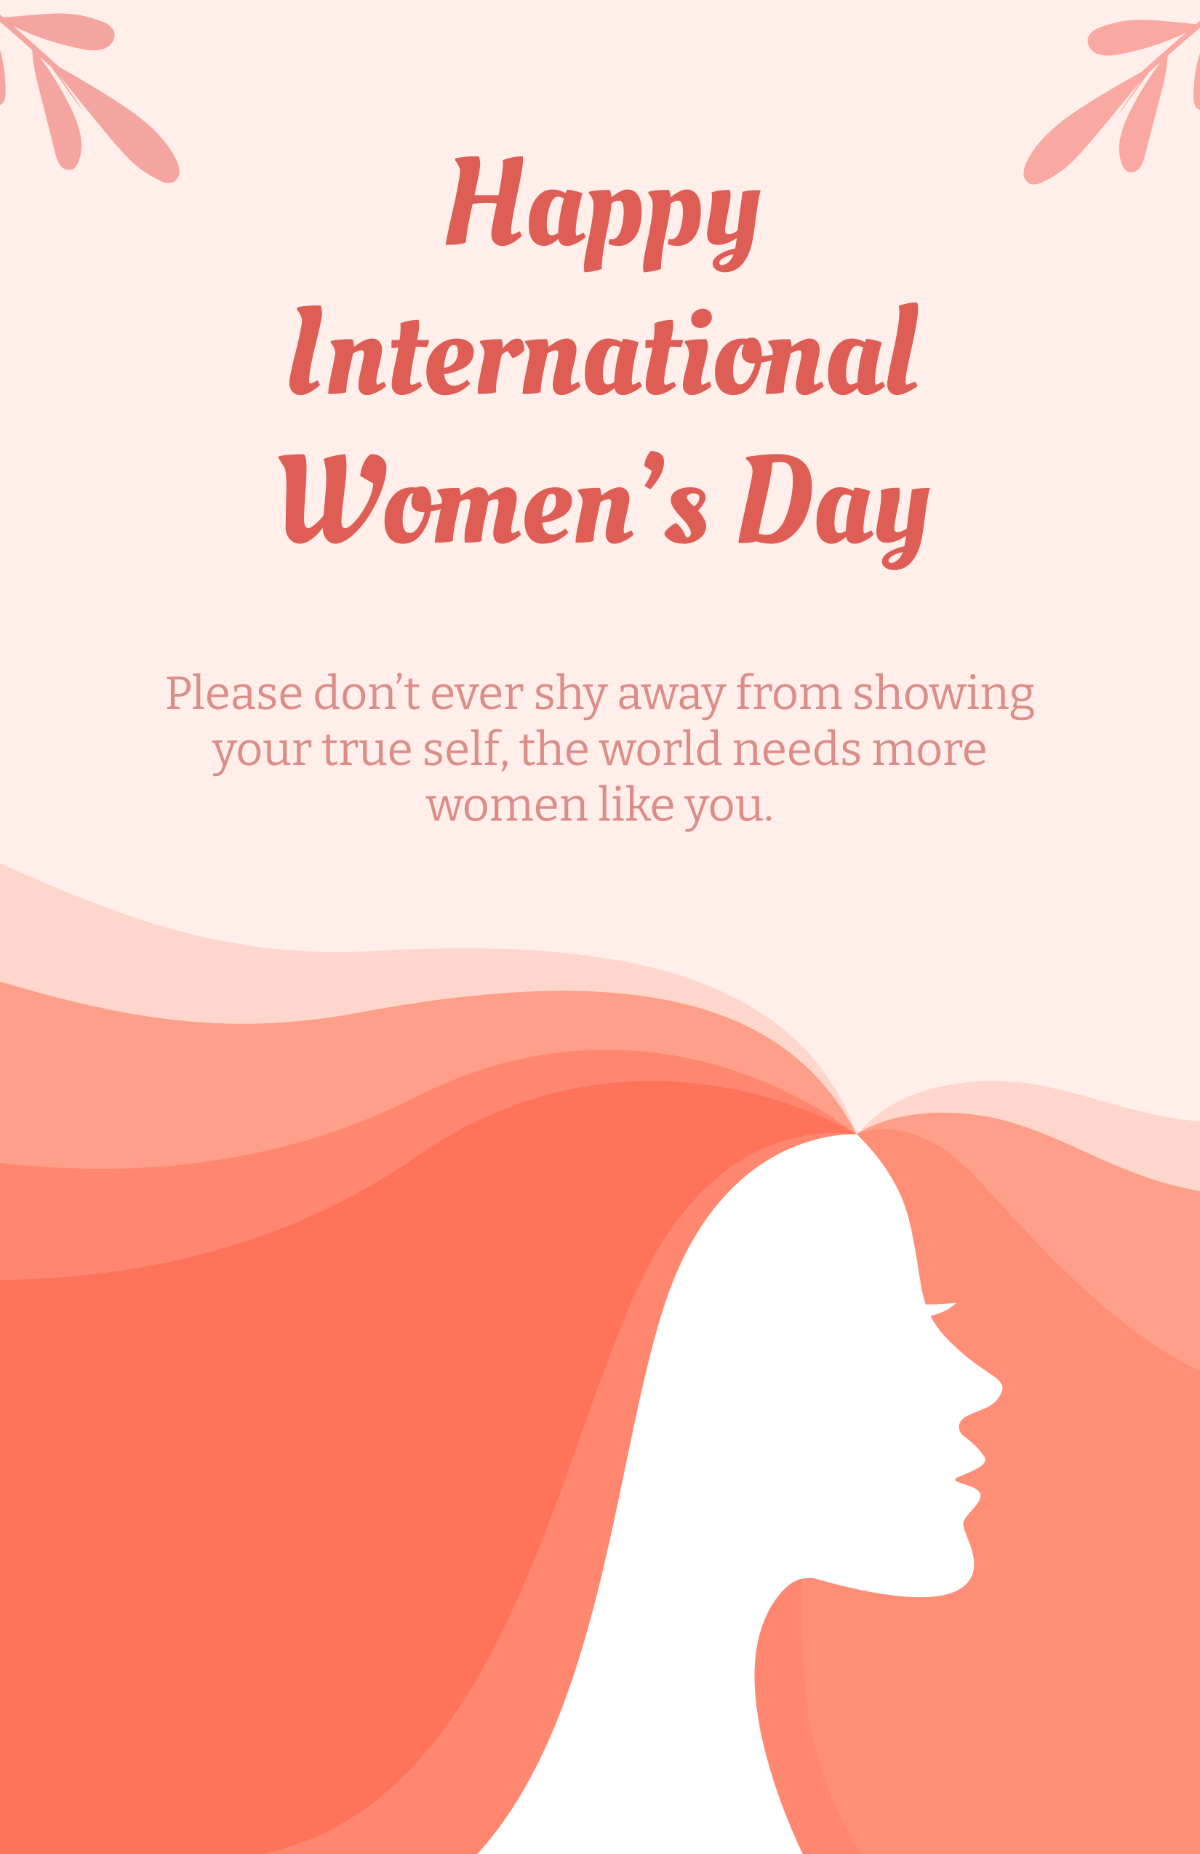 Free Happy International Women's Day Poster Template